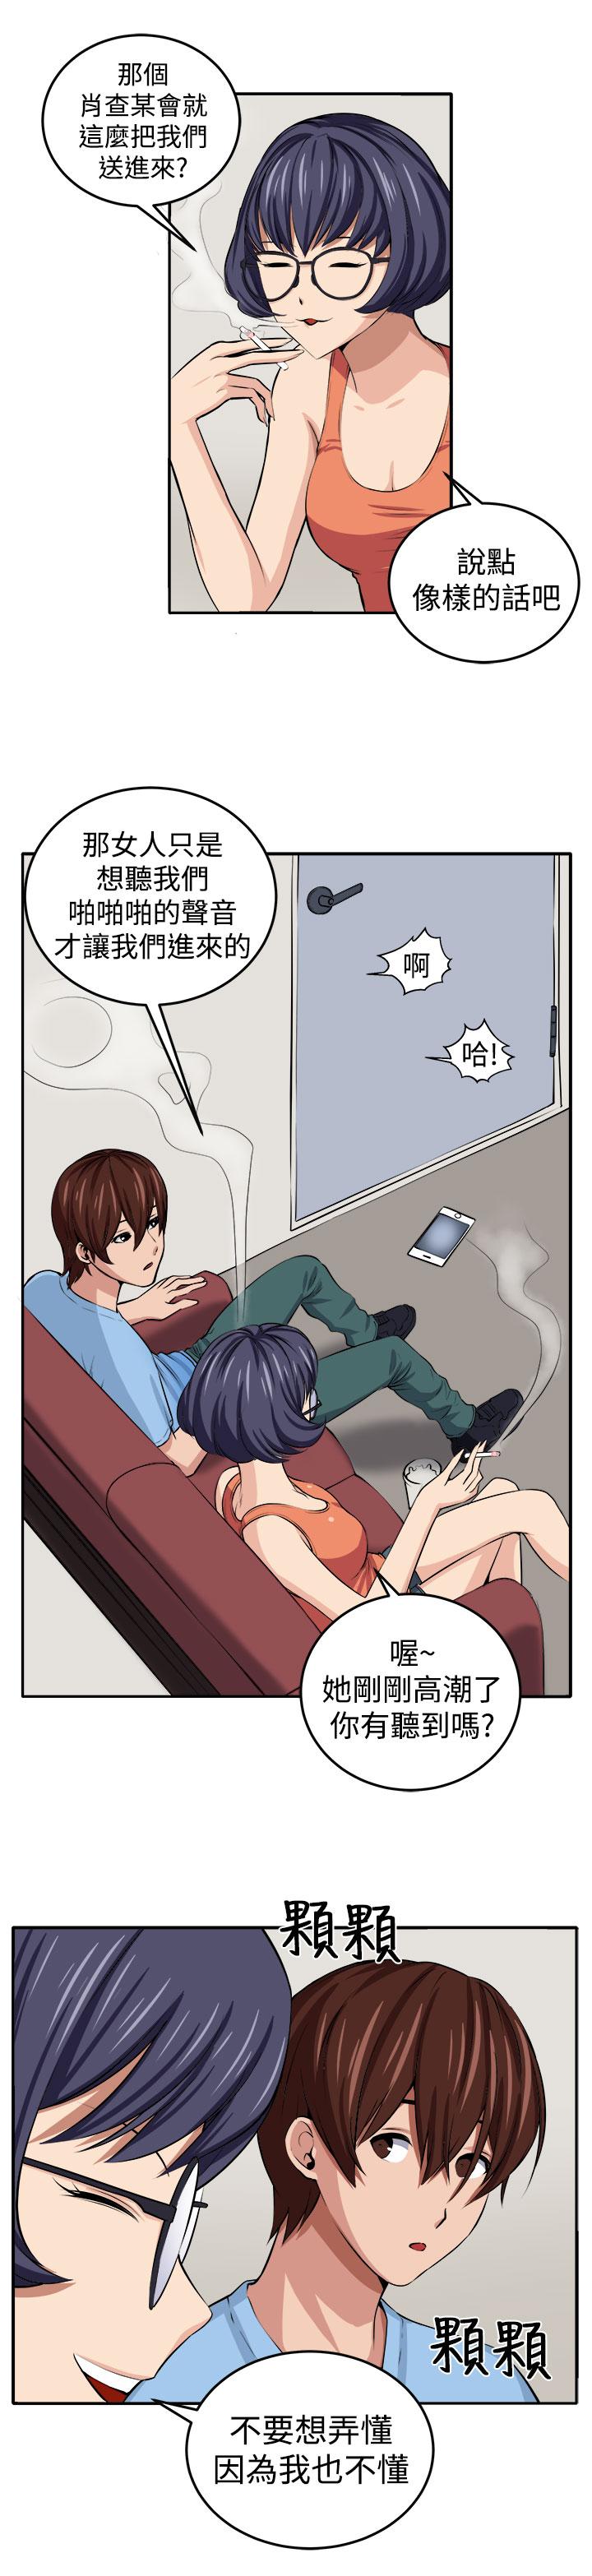 Plumper trap 圈套 ch.14 Indonesian - Page 8